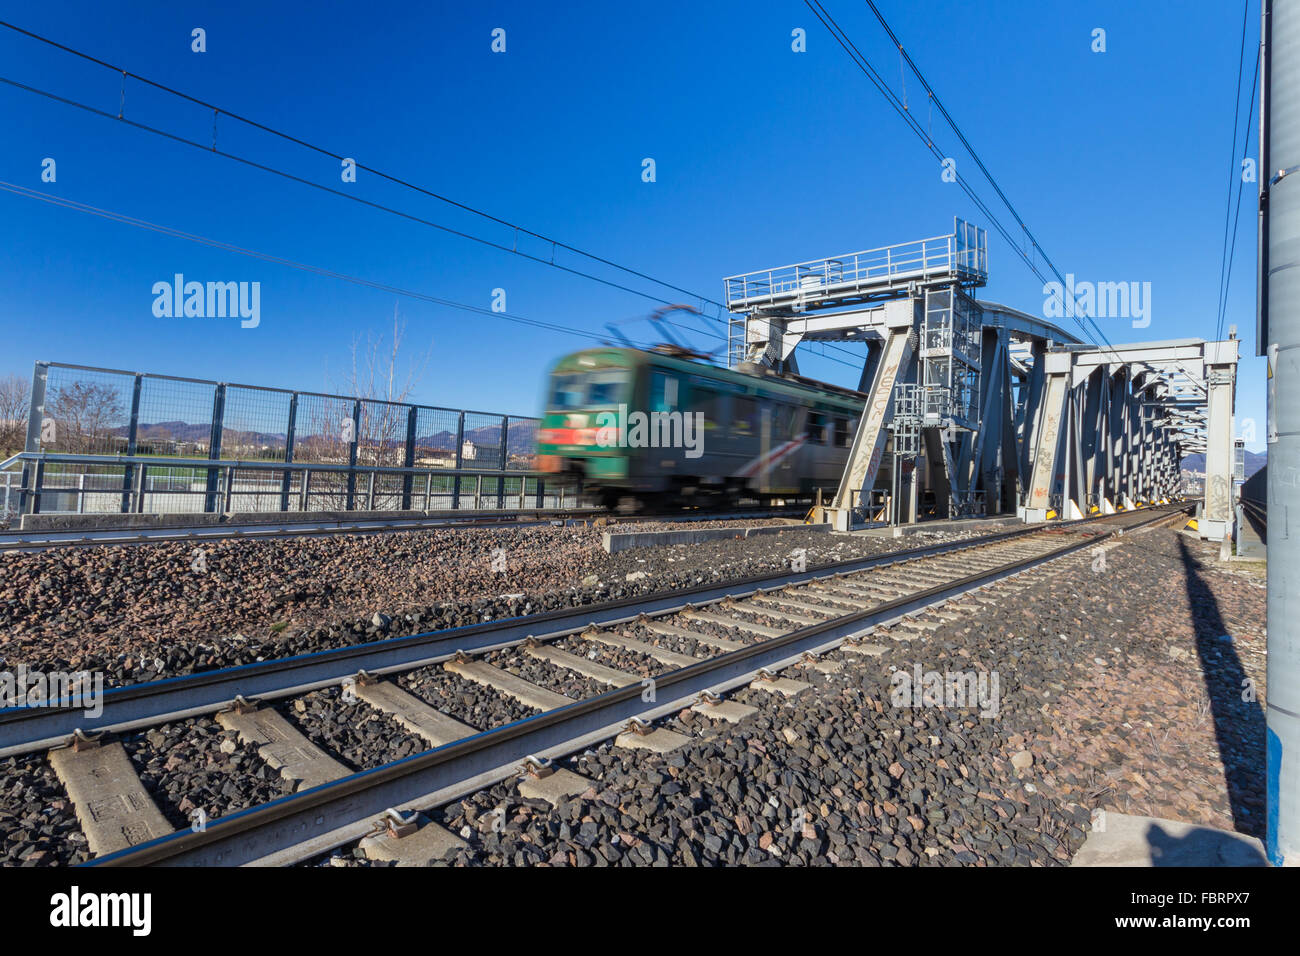 Wide angle view of a railroad bridge with passing train Stock Photo